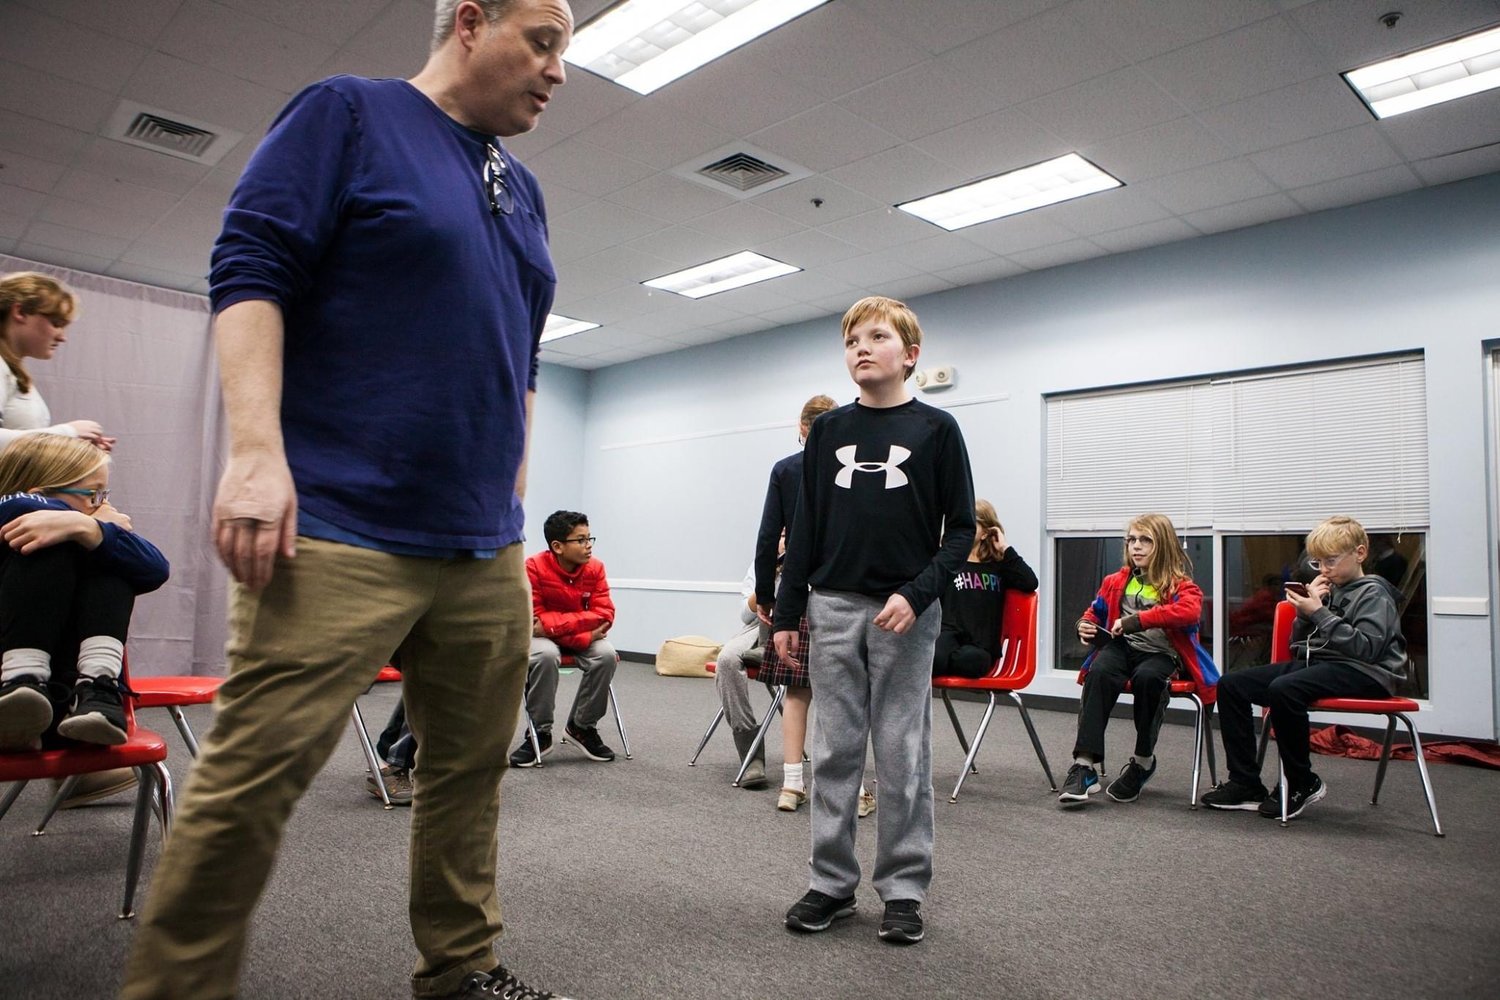 Philip Kittiver usually takes a hands-on approach to theater. Now he’s teaching online acting workshops to keep his students entertained and social during their time away from Theater in the Park.